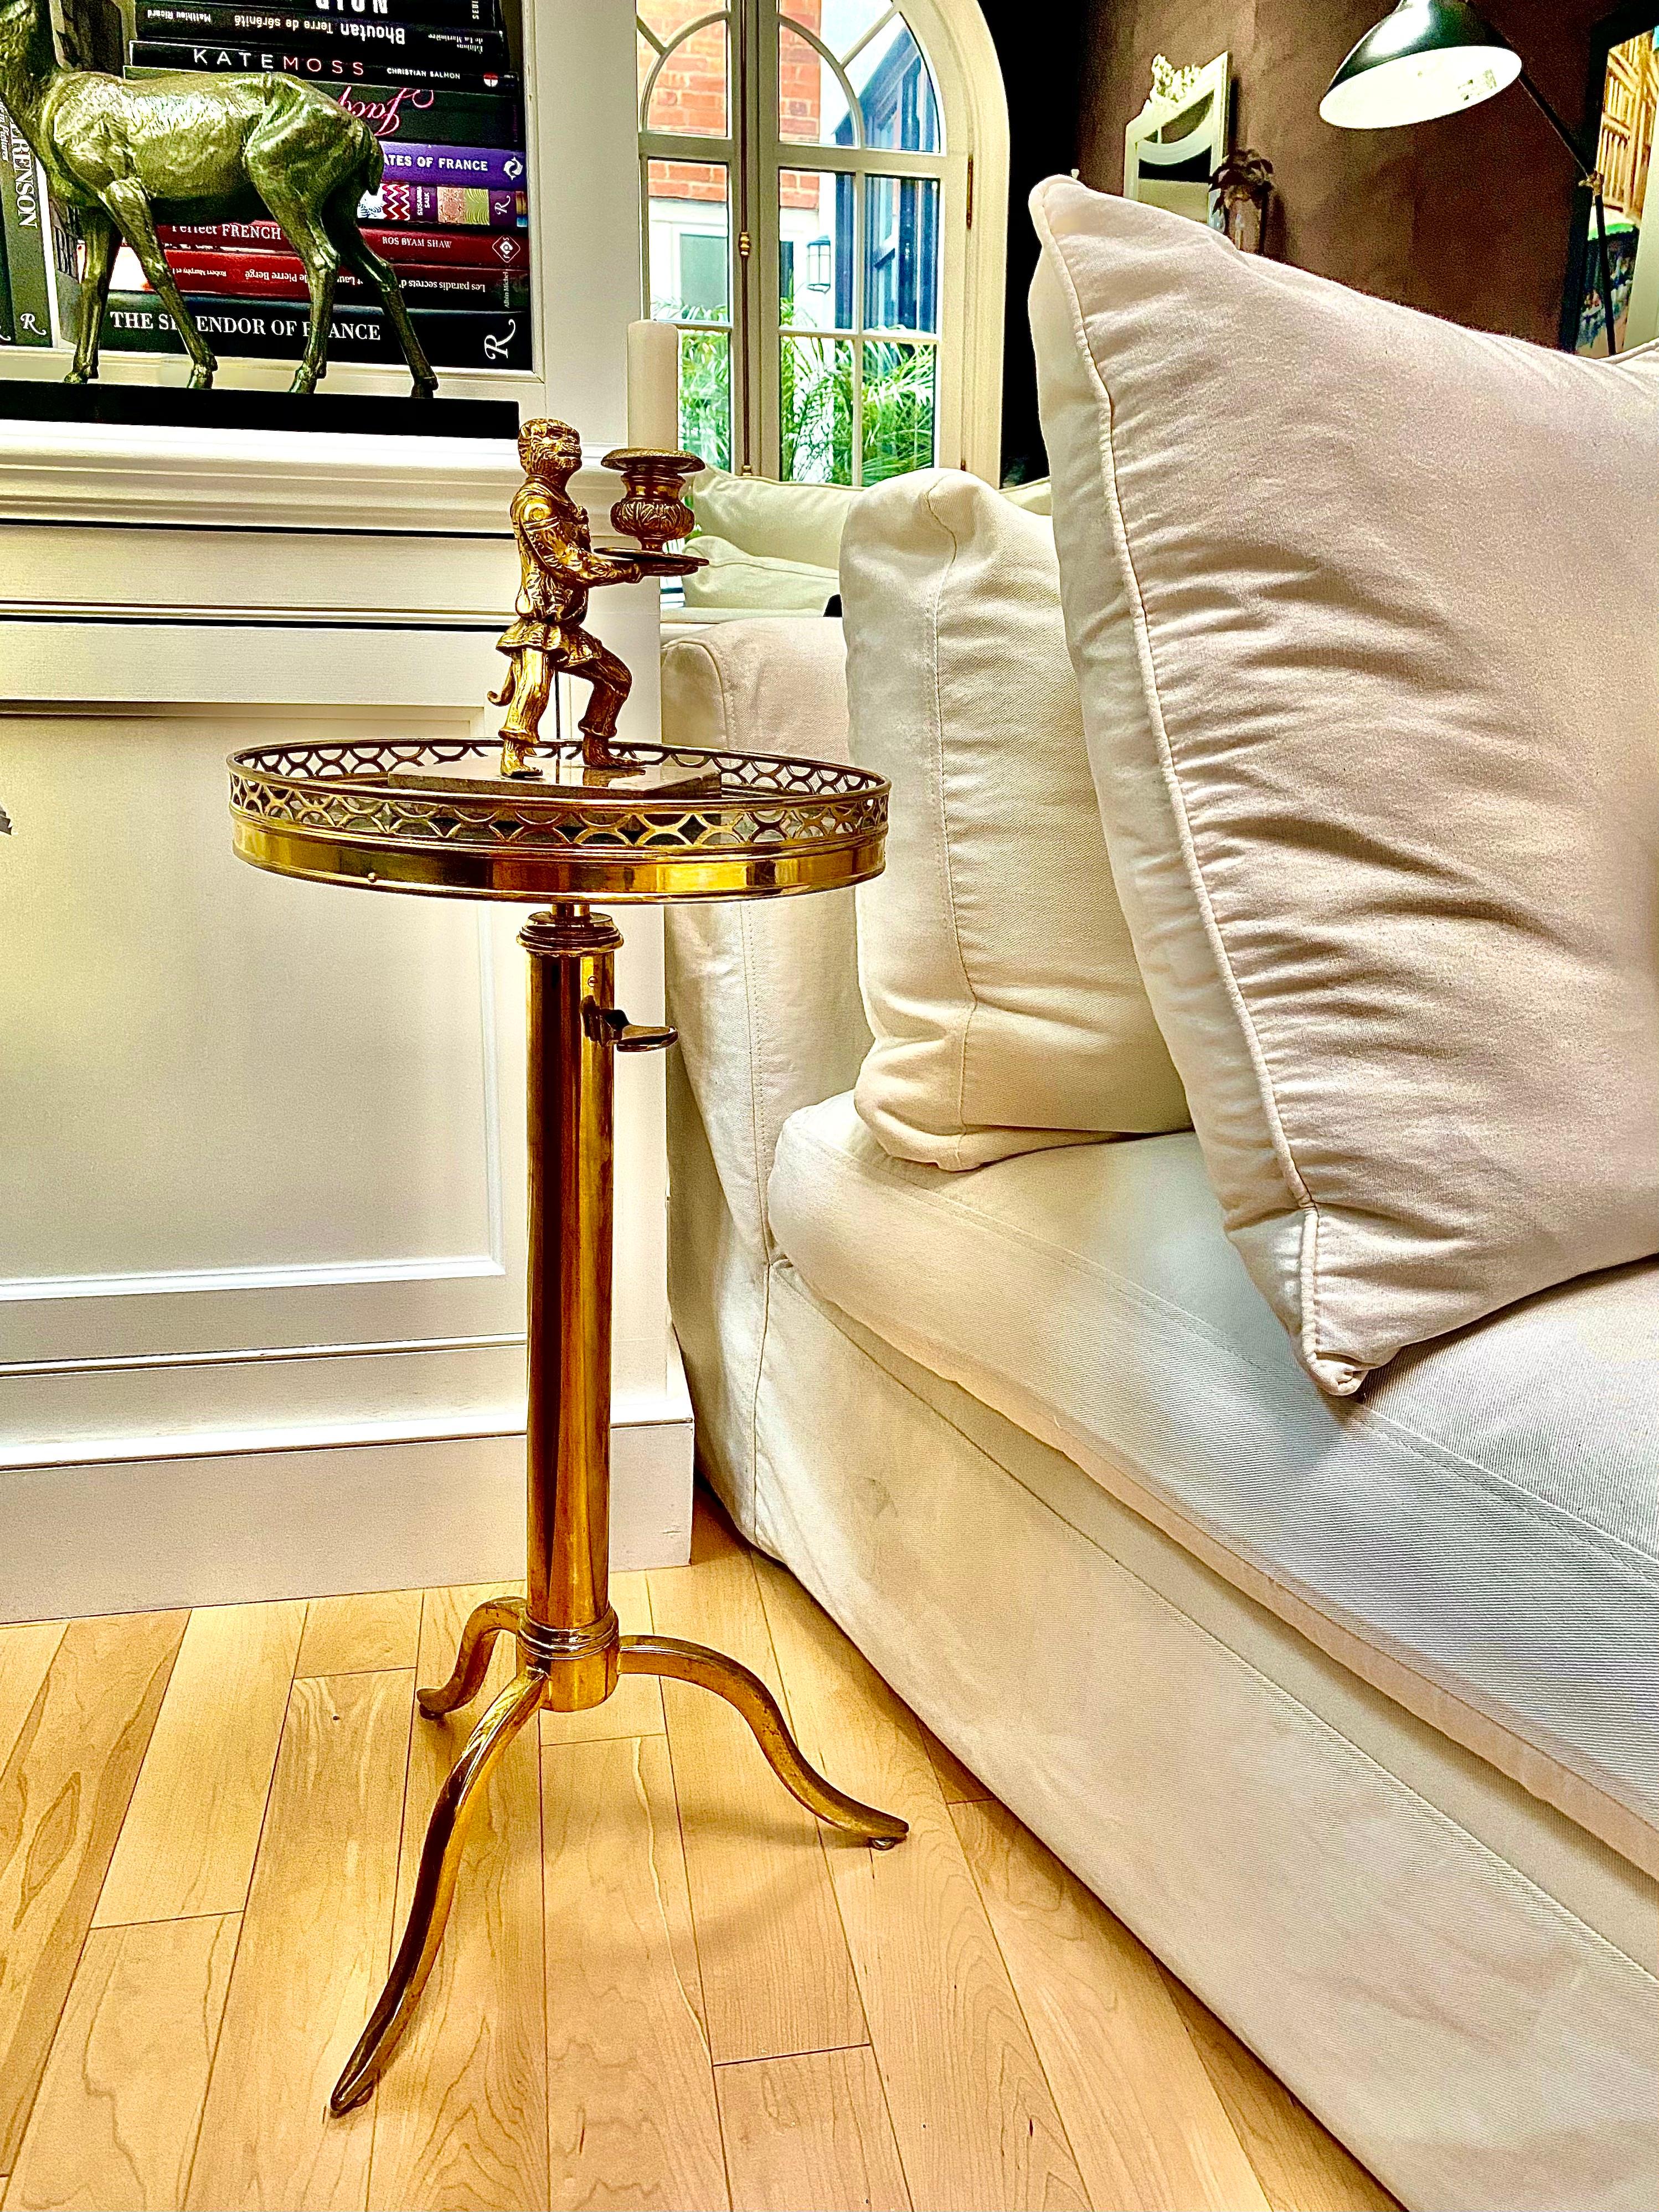 French Bronze Telescopic Guéridon side tables in the Manner of Maison Toulouse. Mid-Century Modern. The vey quintescence of chic.

Magnificent bronze end table with bronze galerie surrounding a black marble top and telescoping tripod base. This